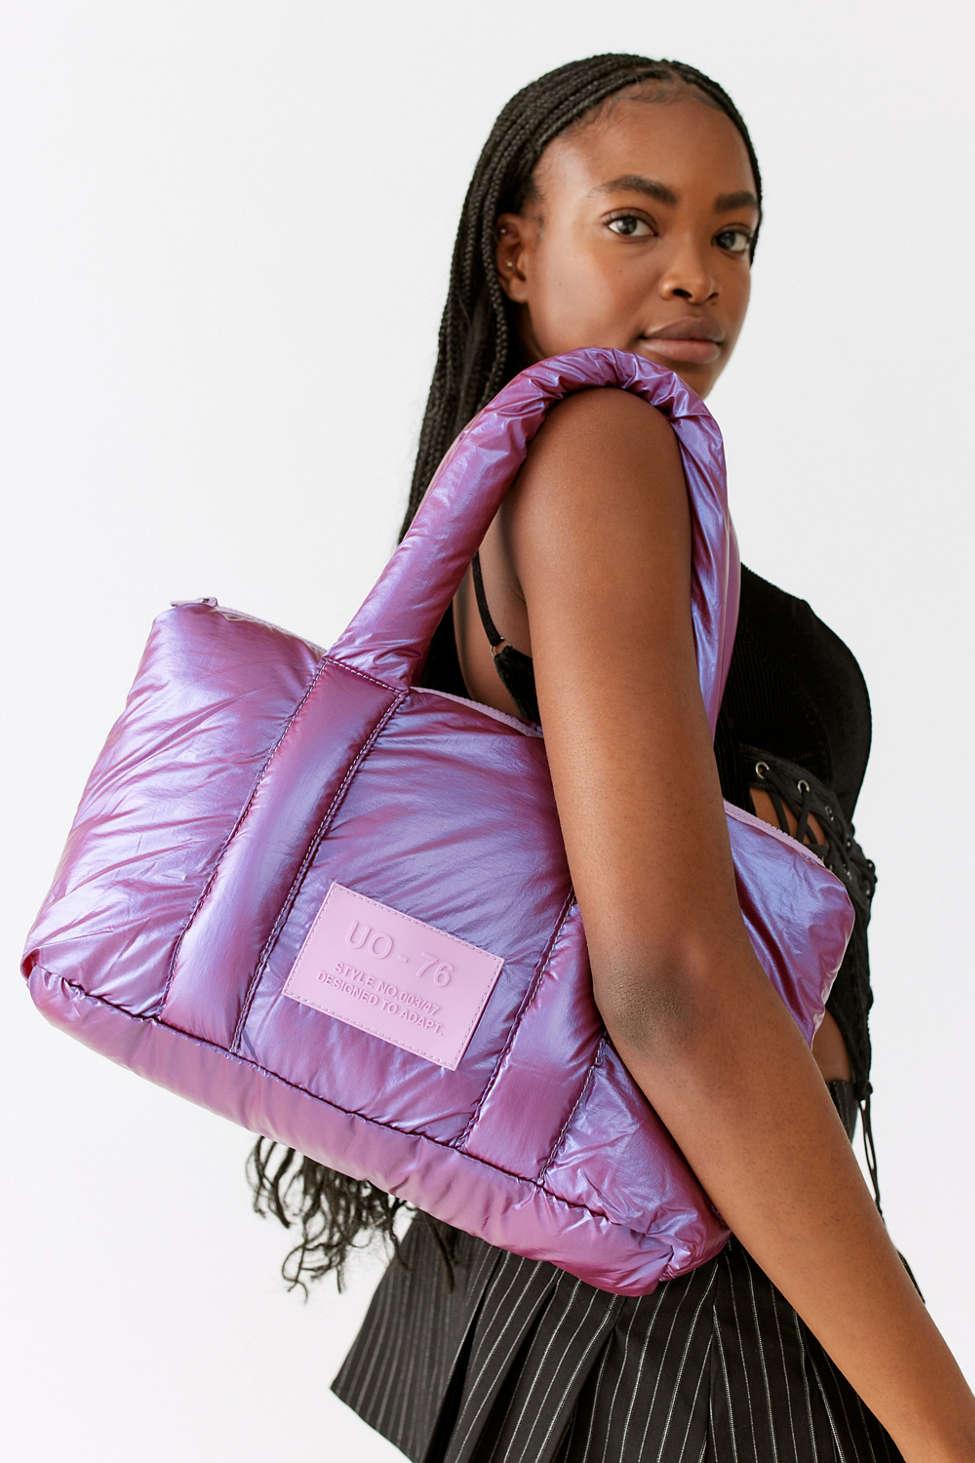 Urban Outfitters Uo Bianca Small Puffy Tote Bag in Purple